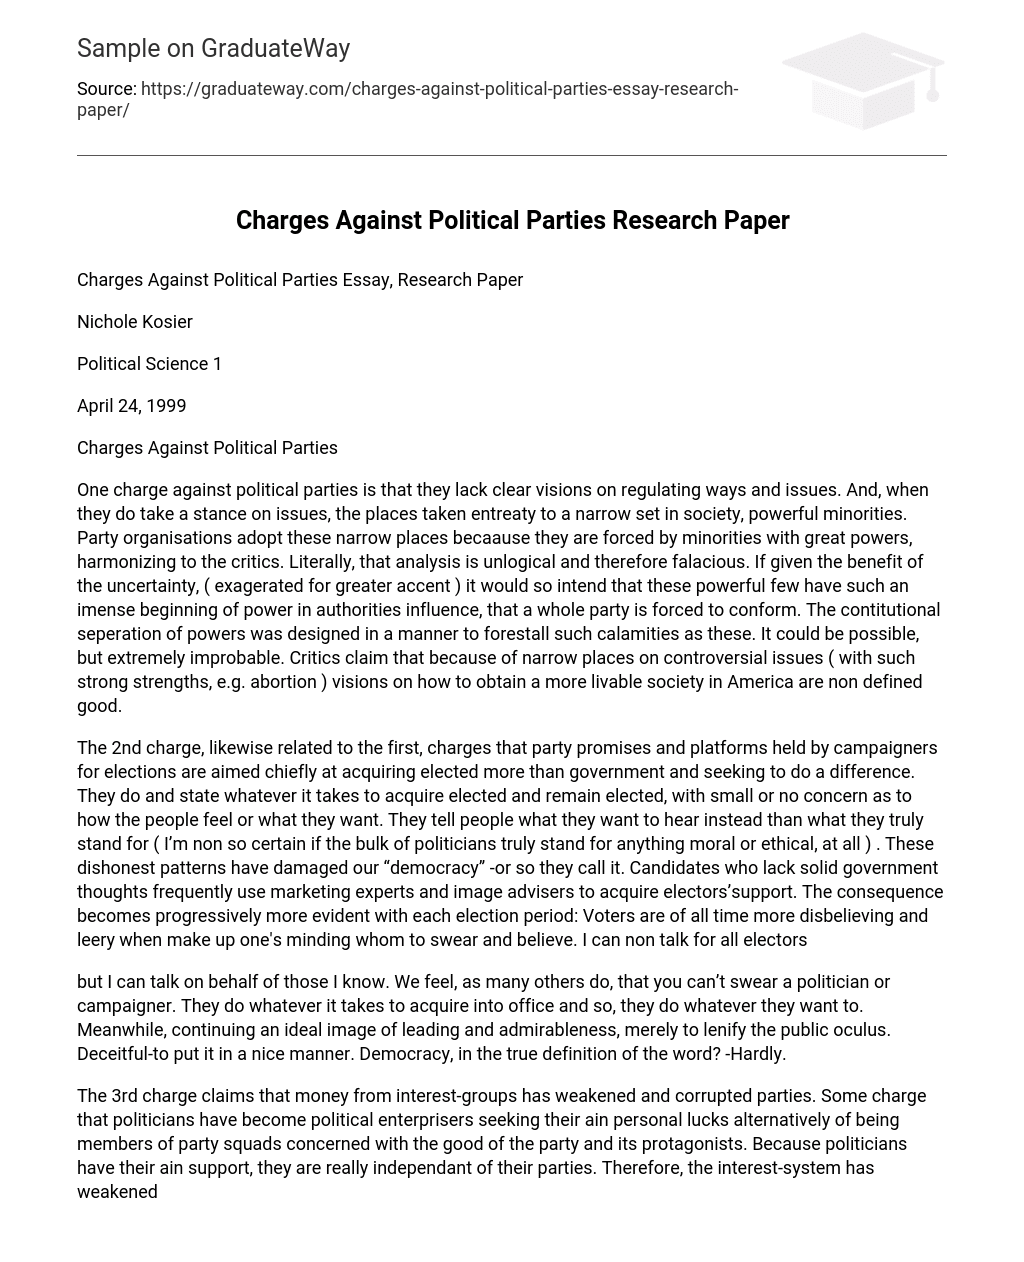 Charges Against Political Parties Research Paper